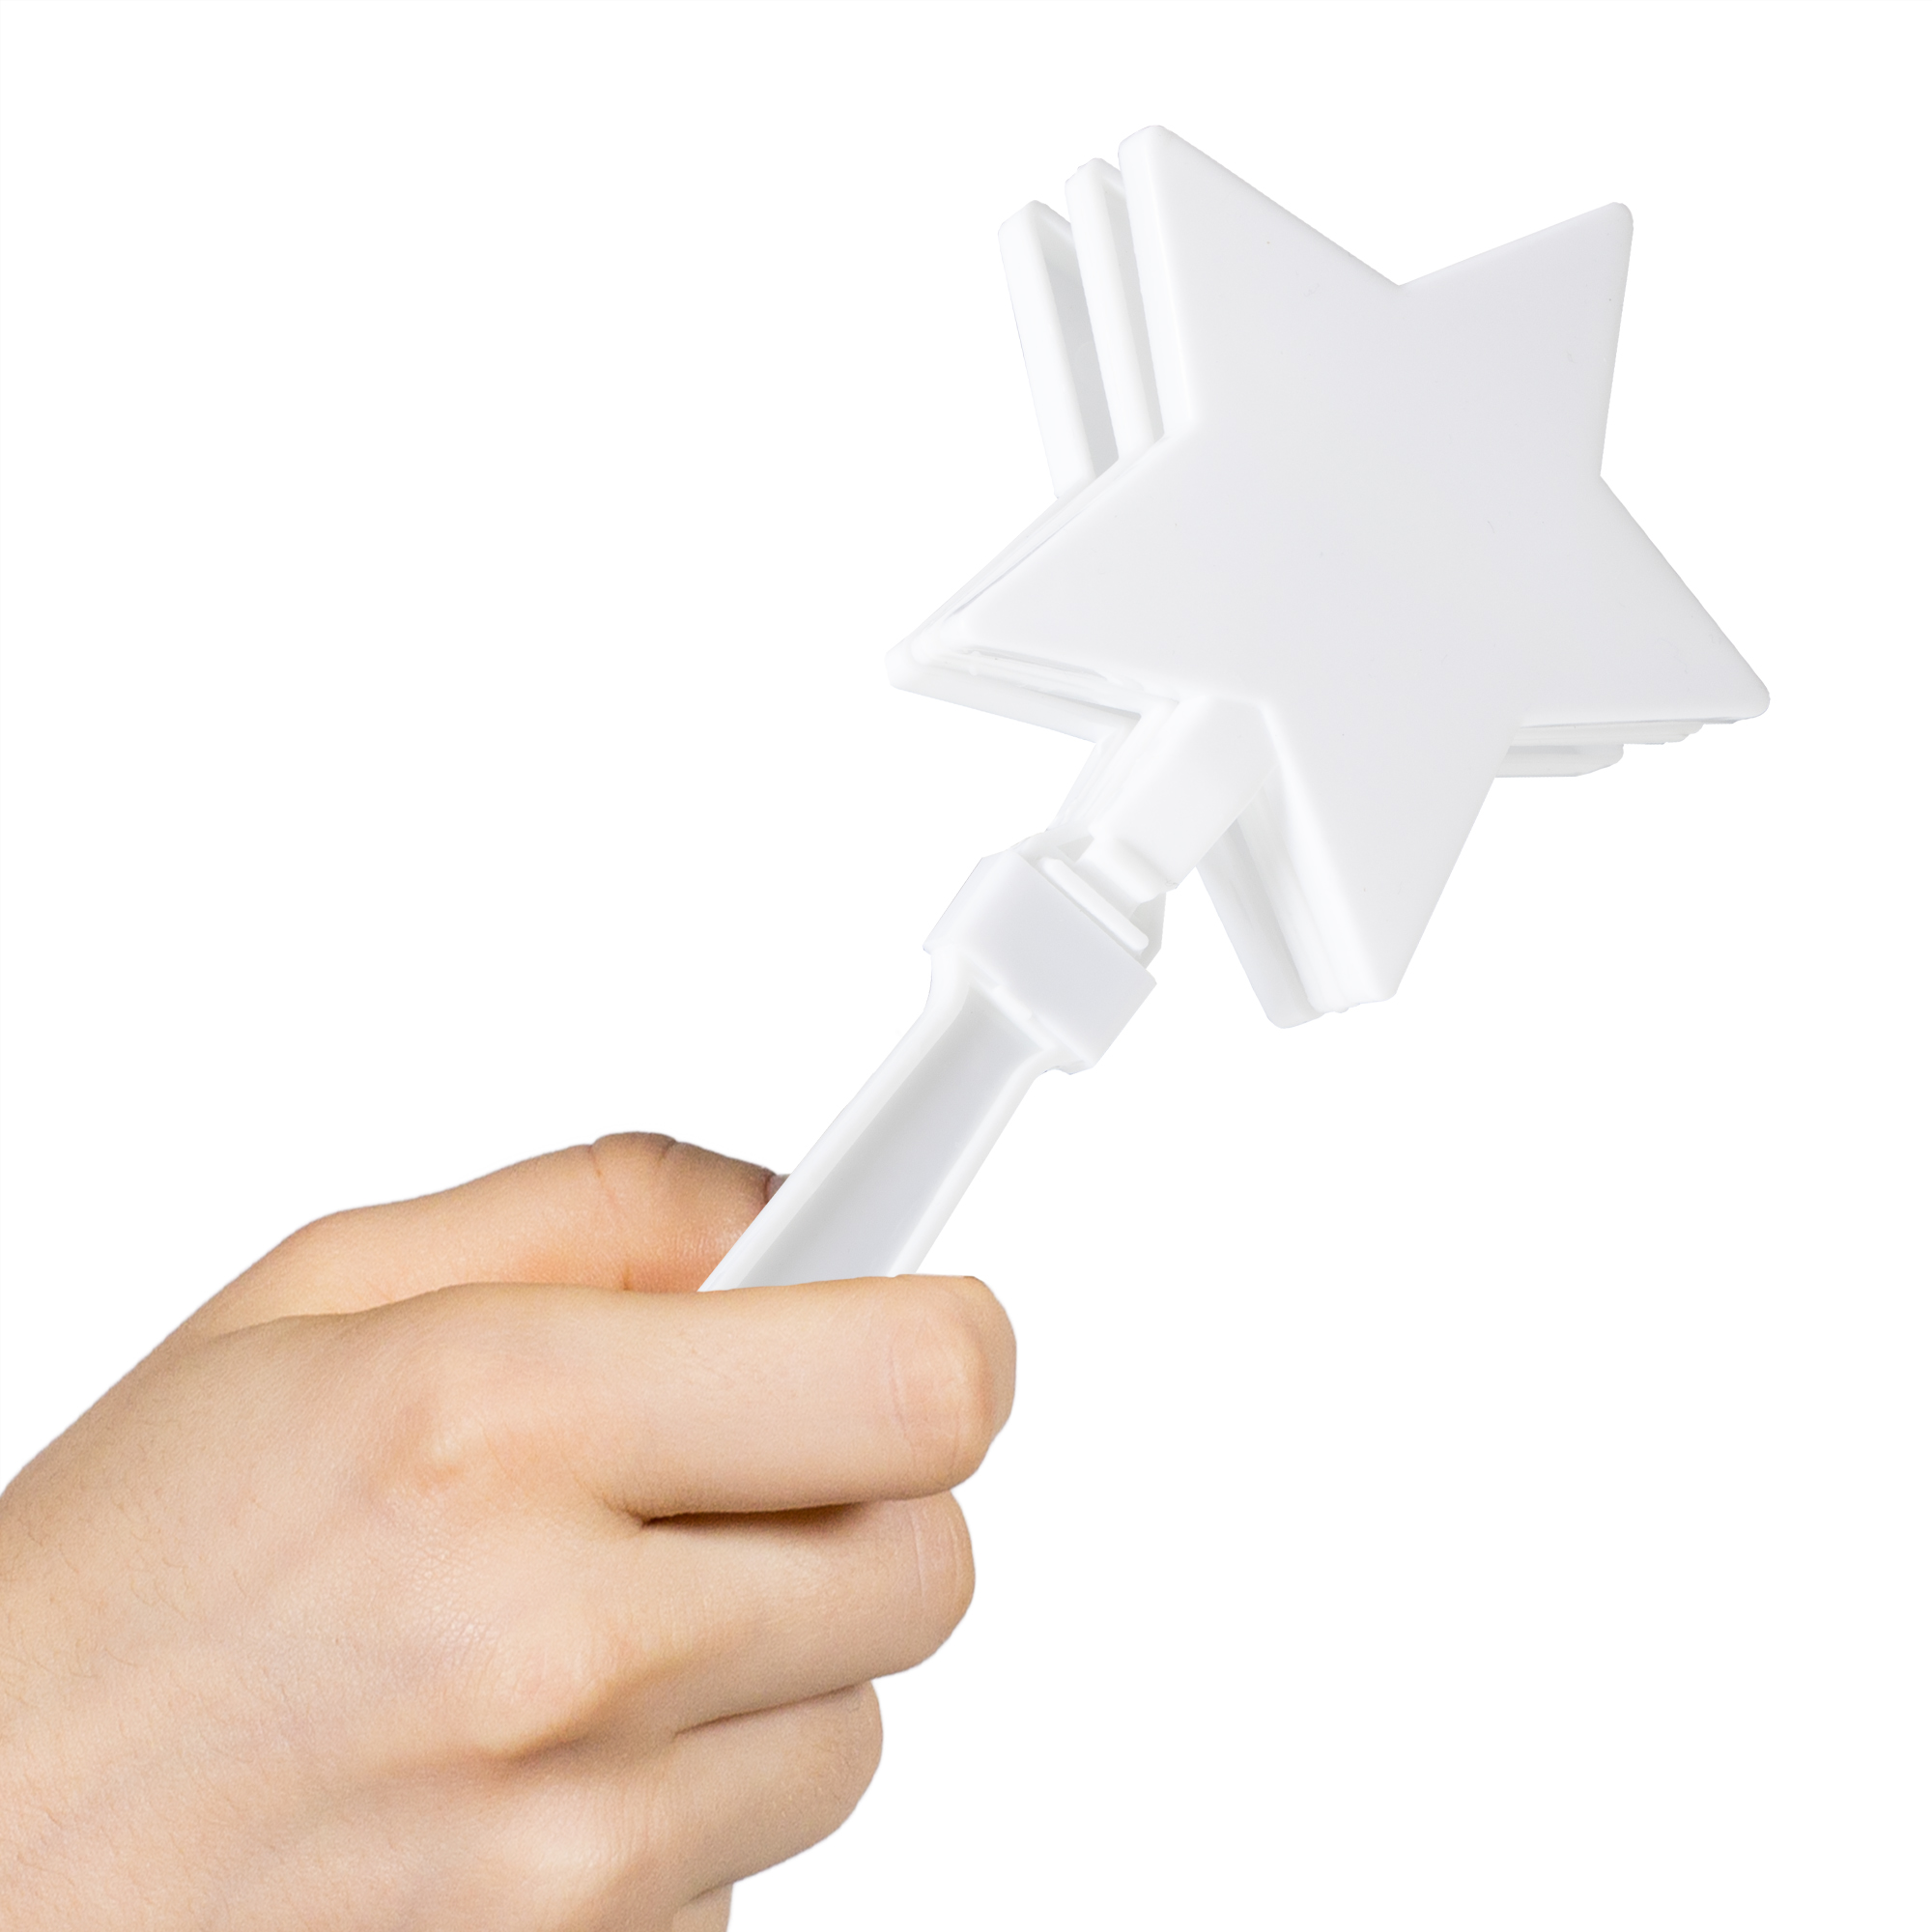 White Star Hand Clappers - 12 Pack by Windy City Novelties